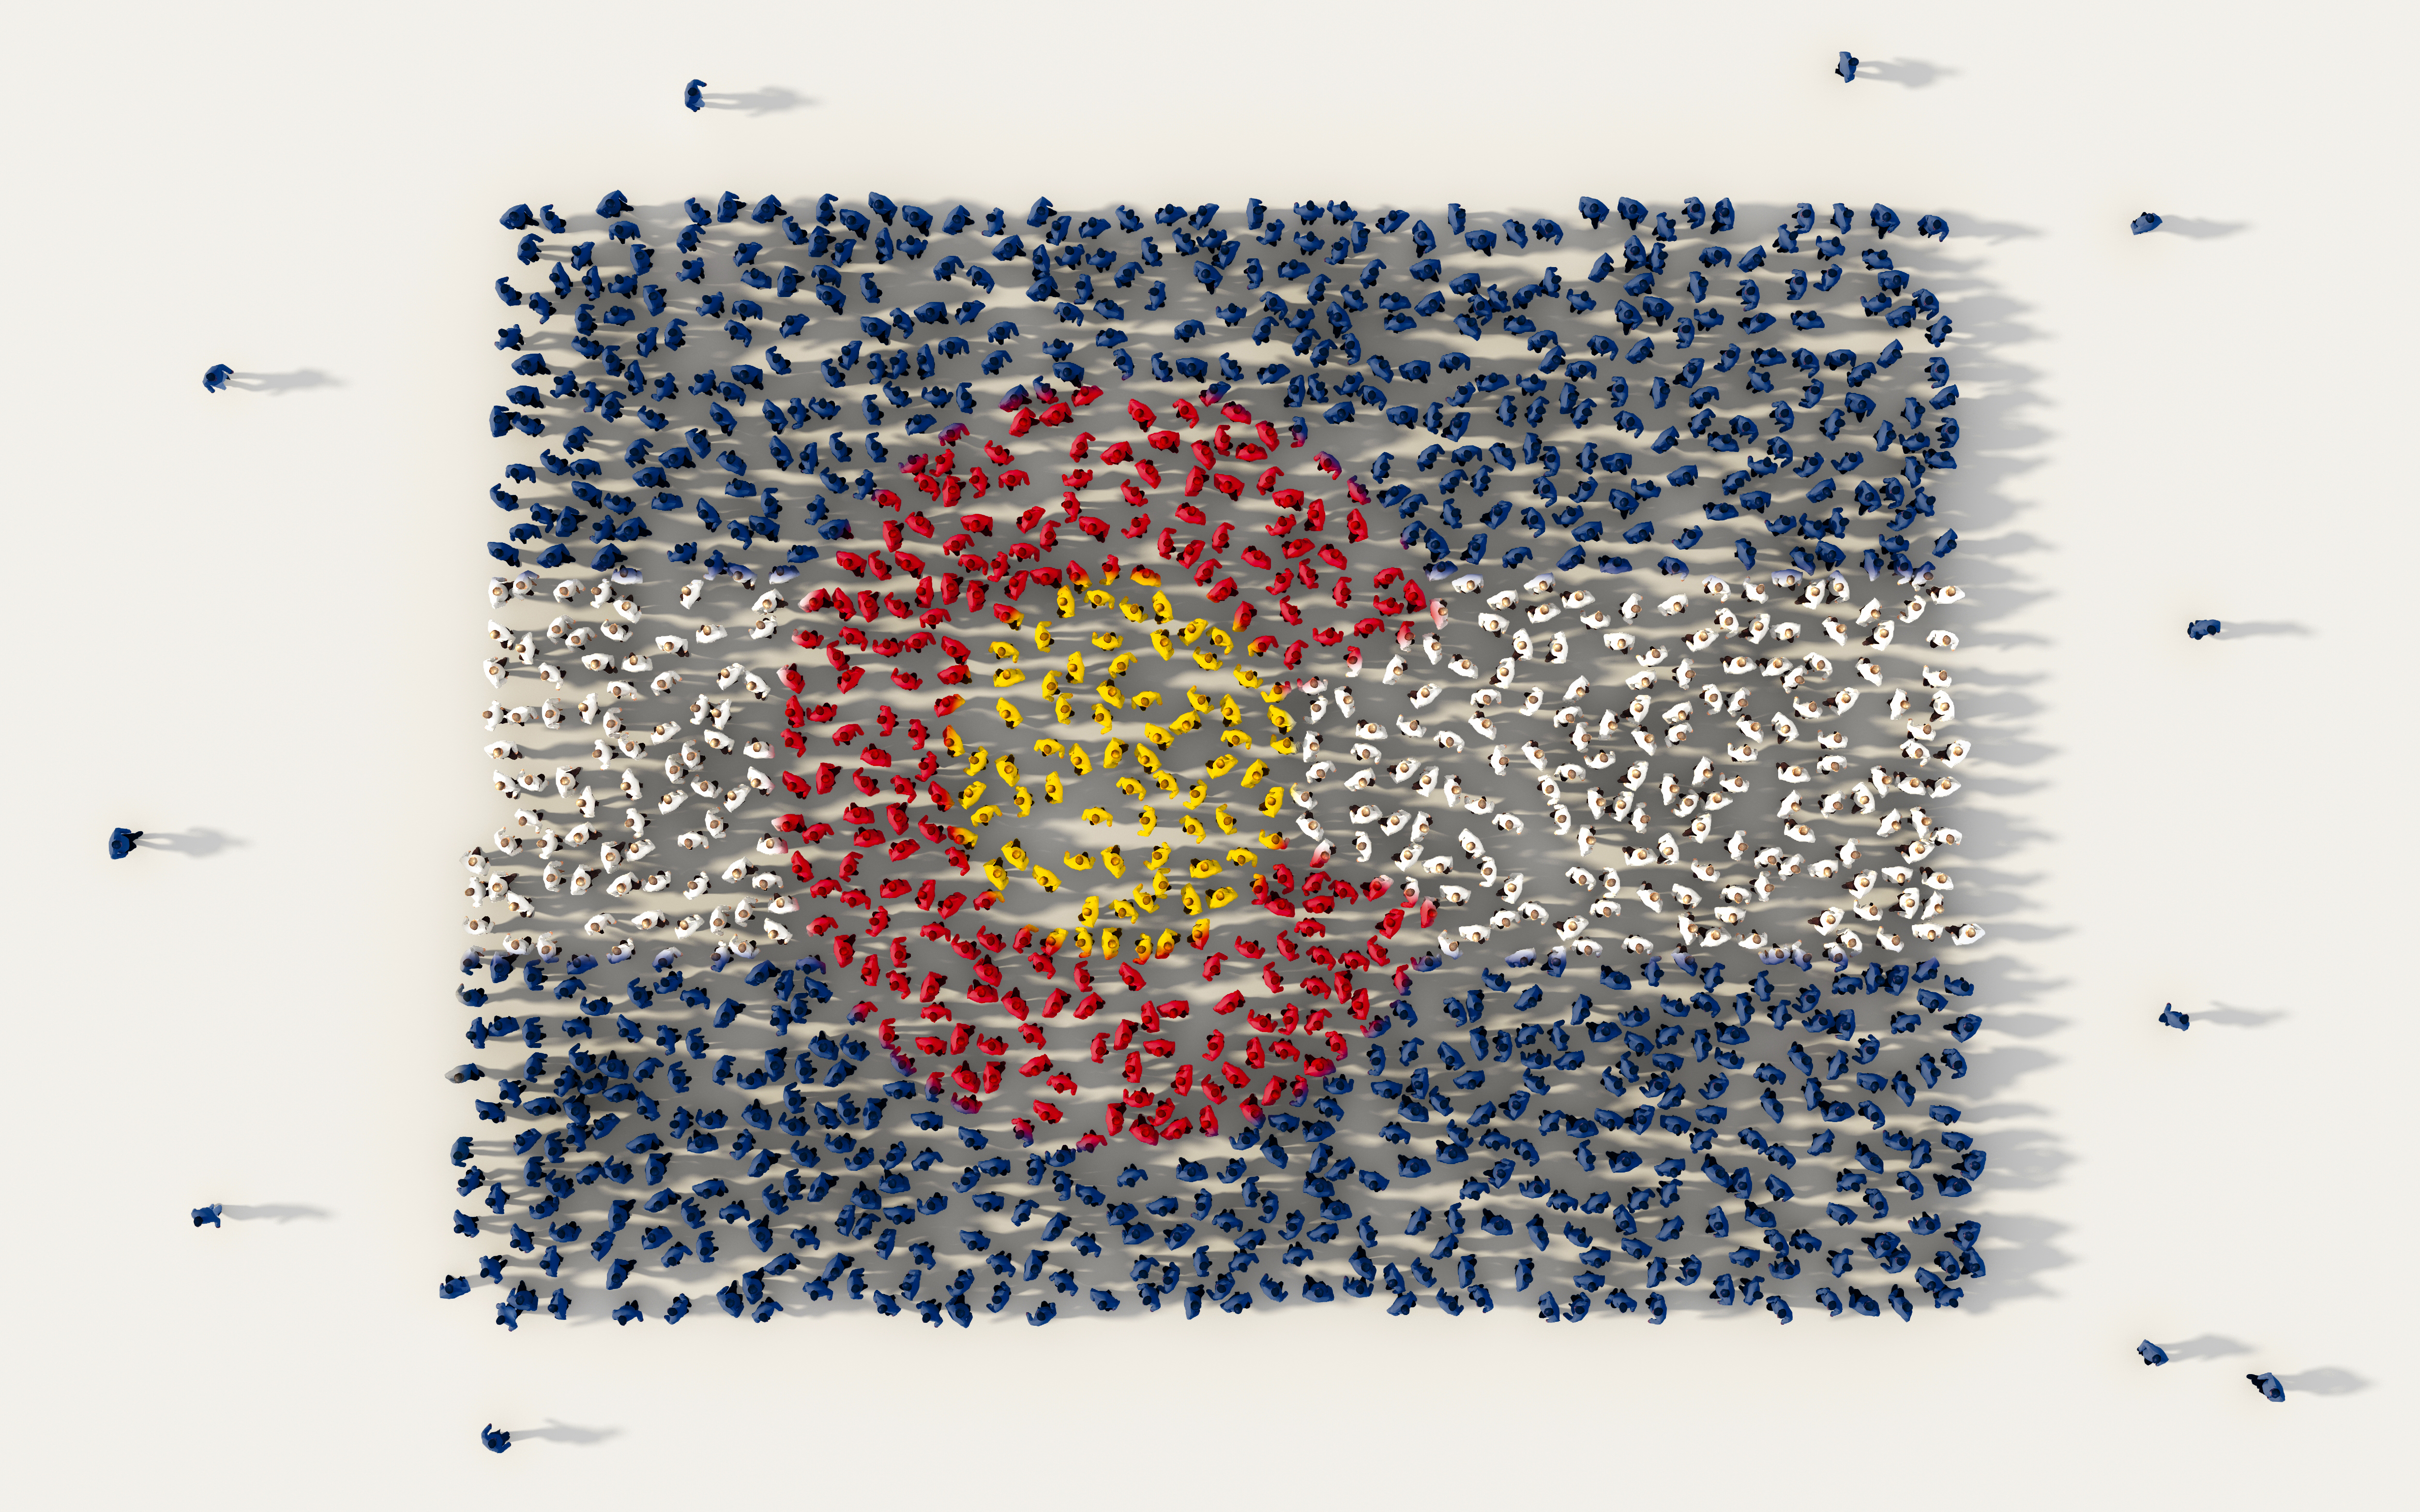 Large group of people forming Colorado flag map in The United States of America, USA, in social media and community concept on white background. 3d sign symbol of crowd illustration from above